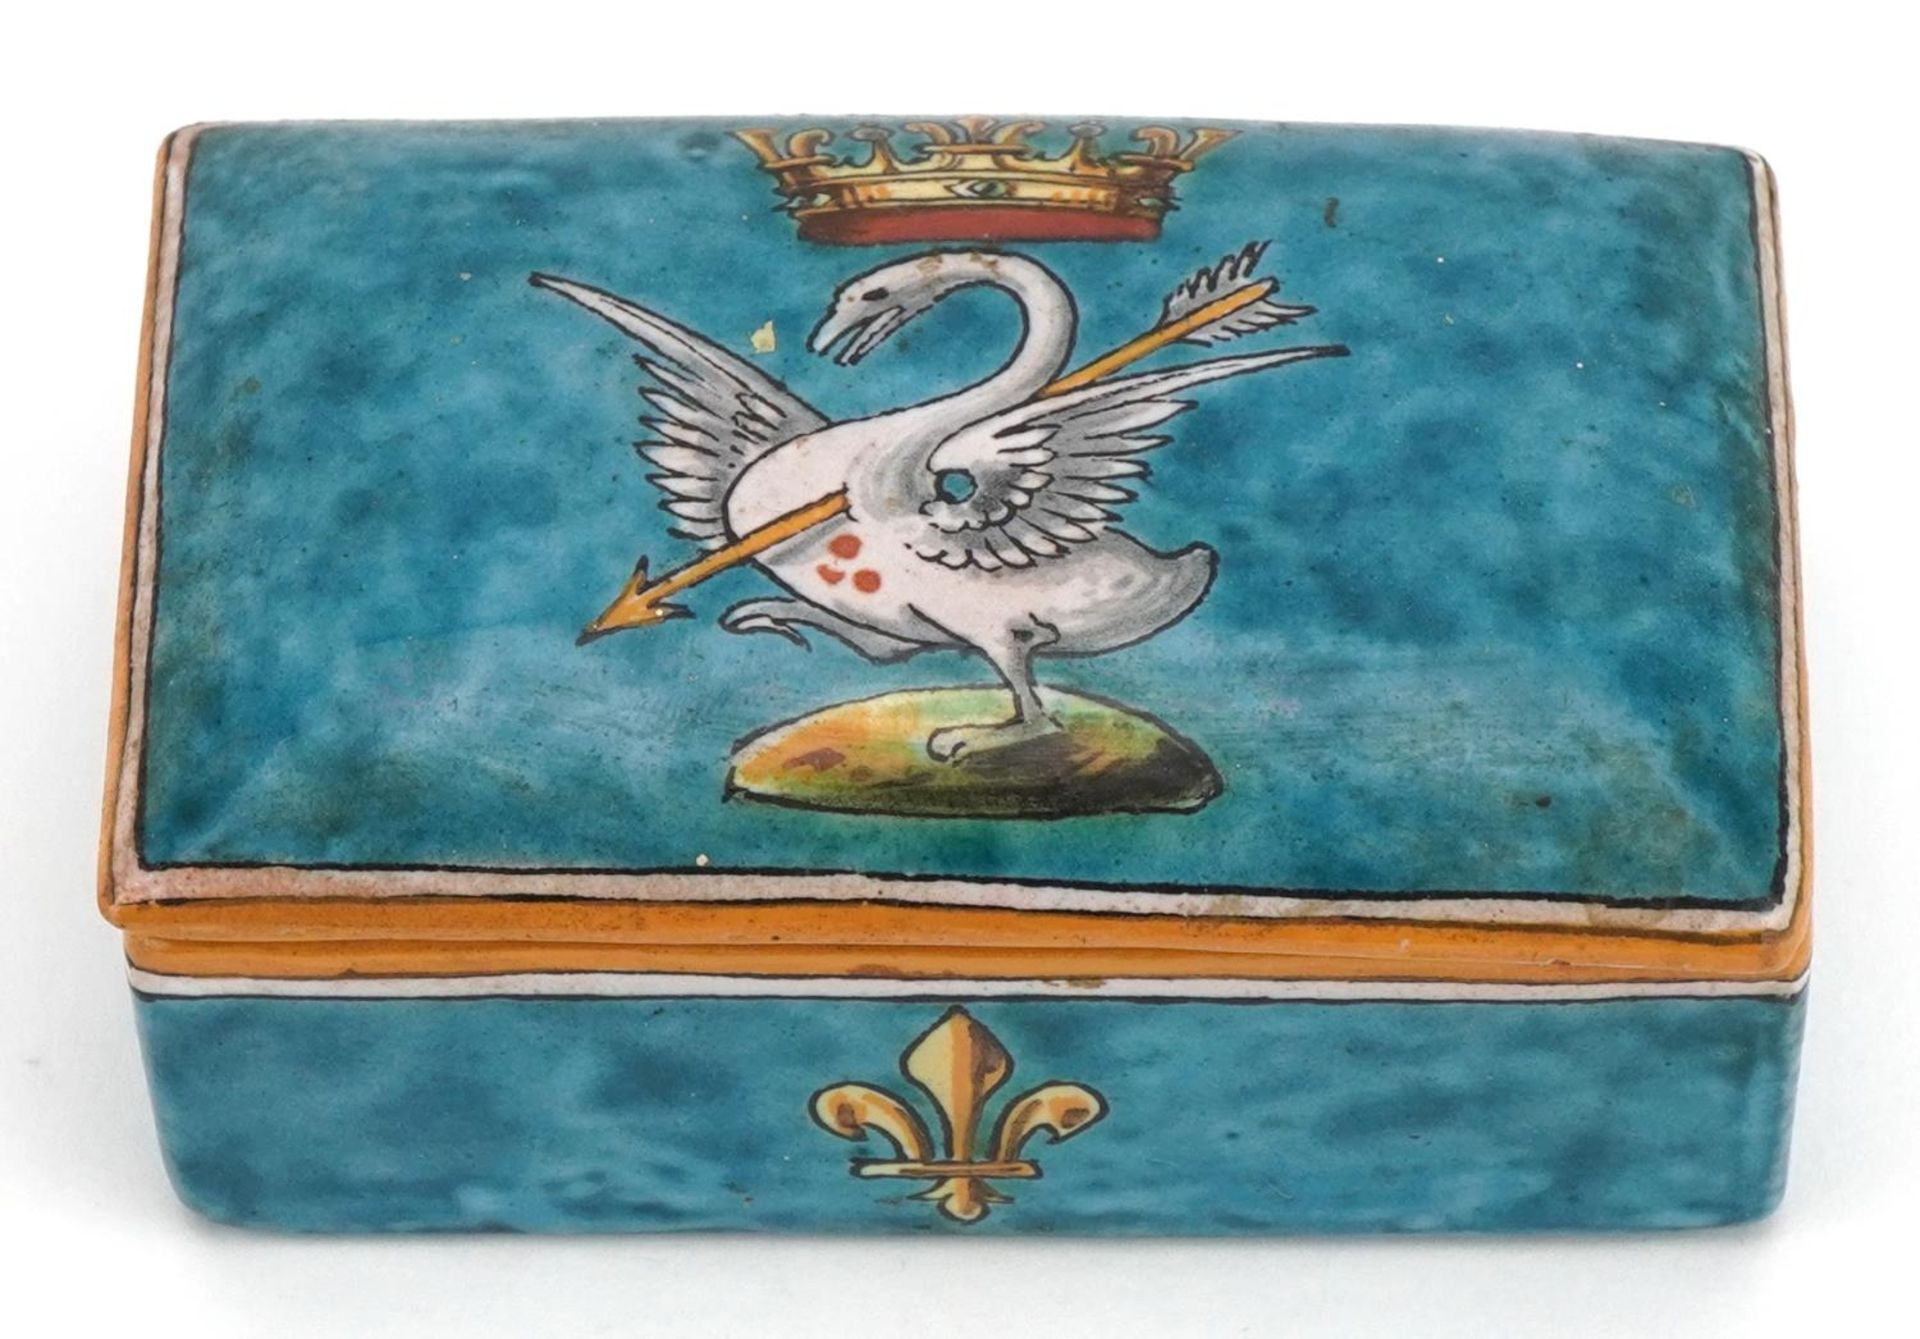 Ulysse Blois, 19th century French faience glazed pottery box and cover hand painted with fleur de - Image 4 of 8